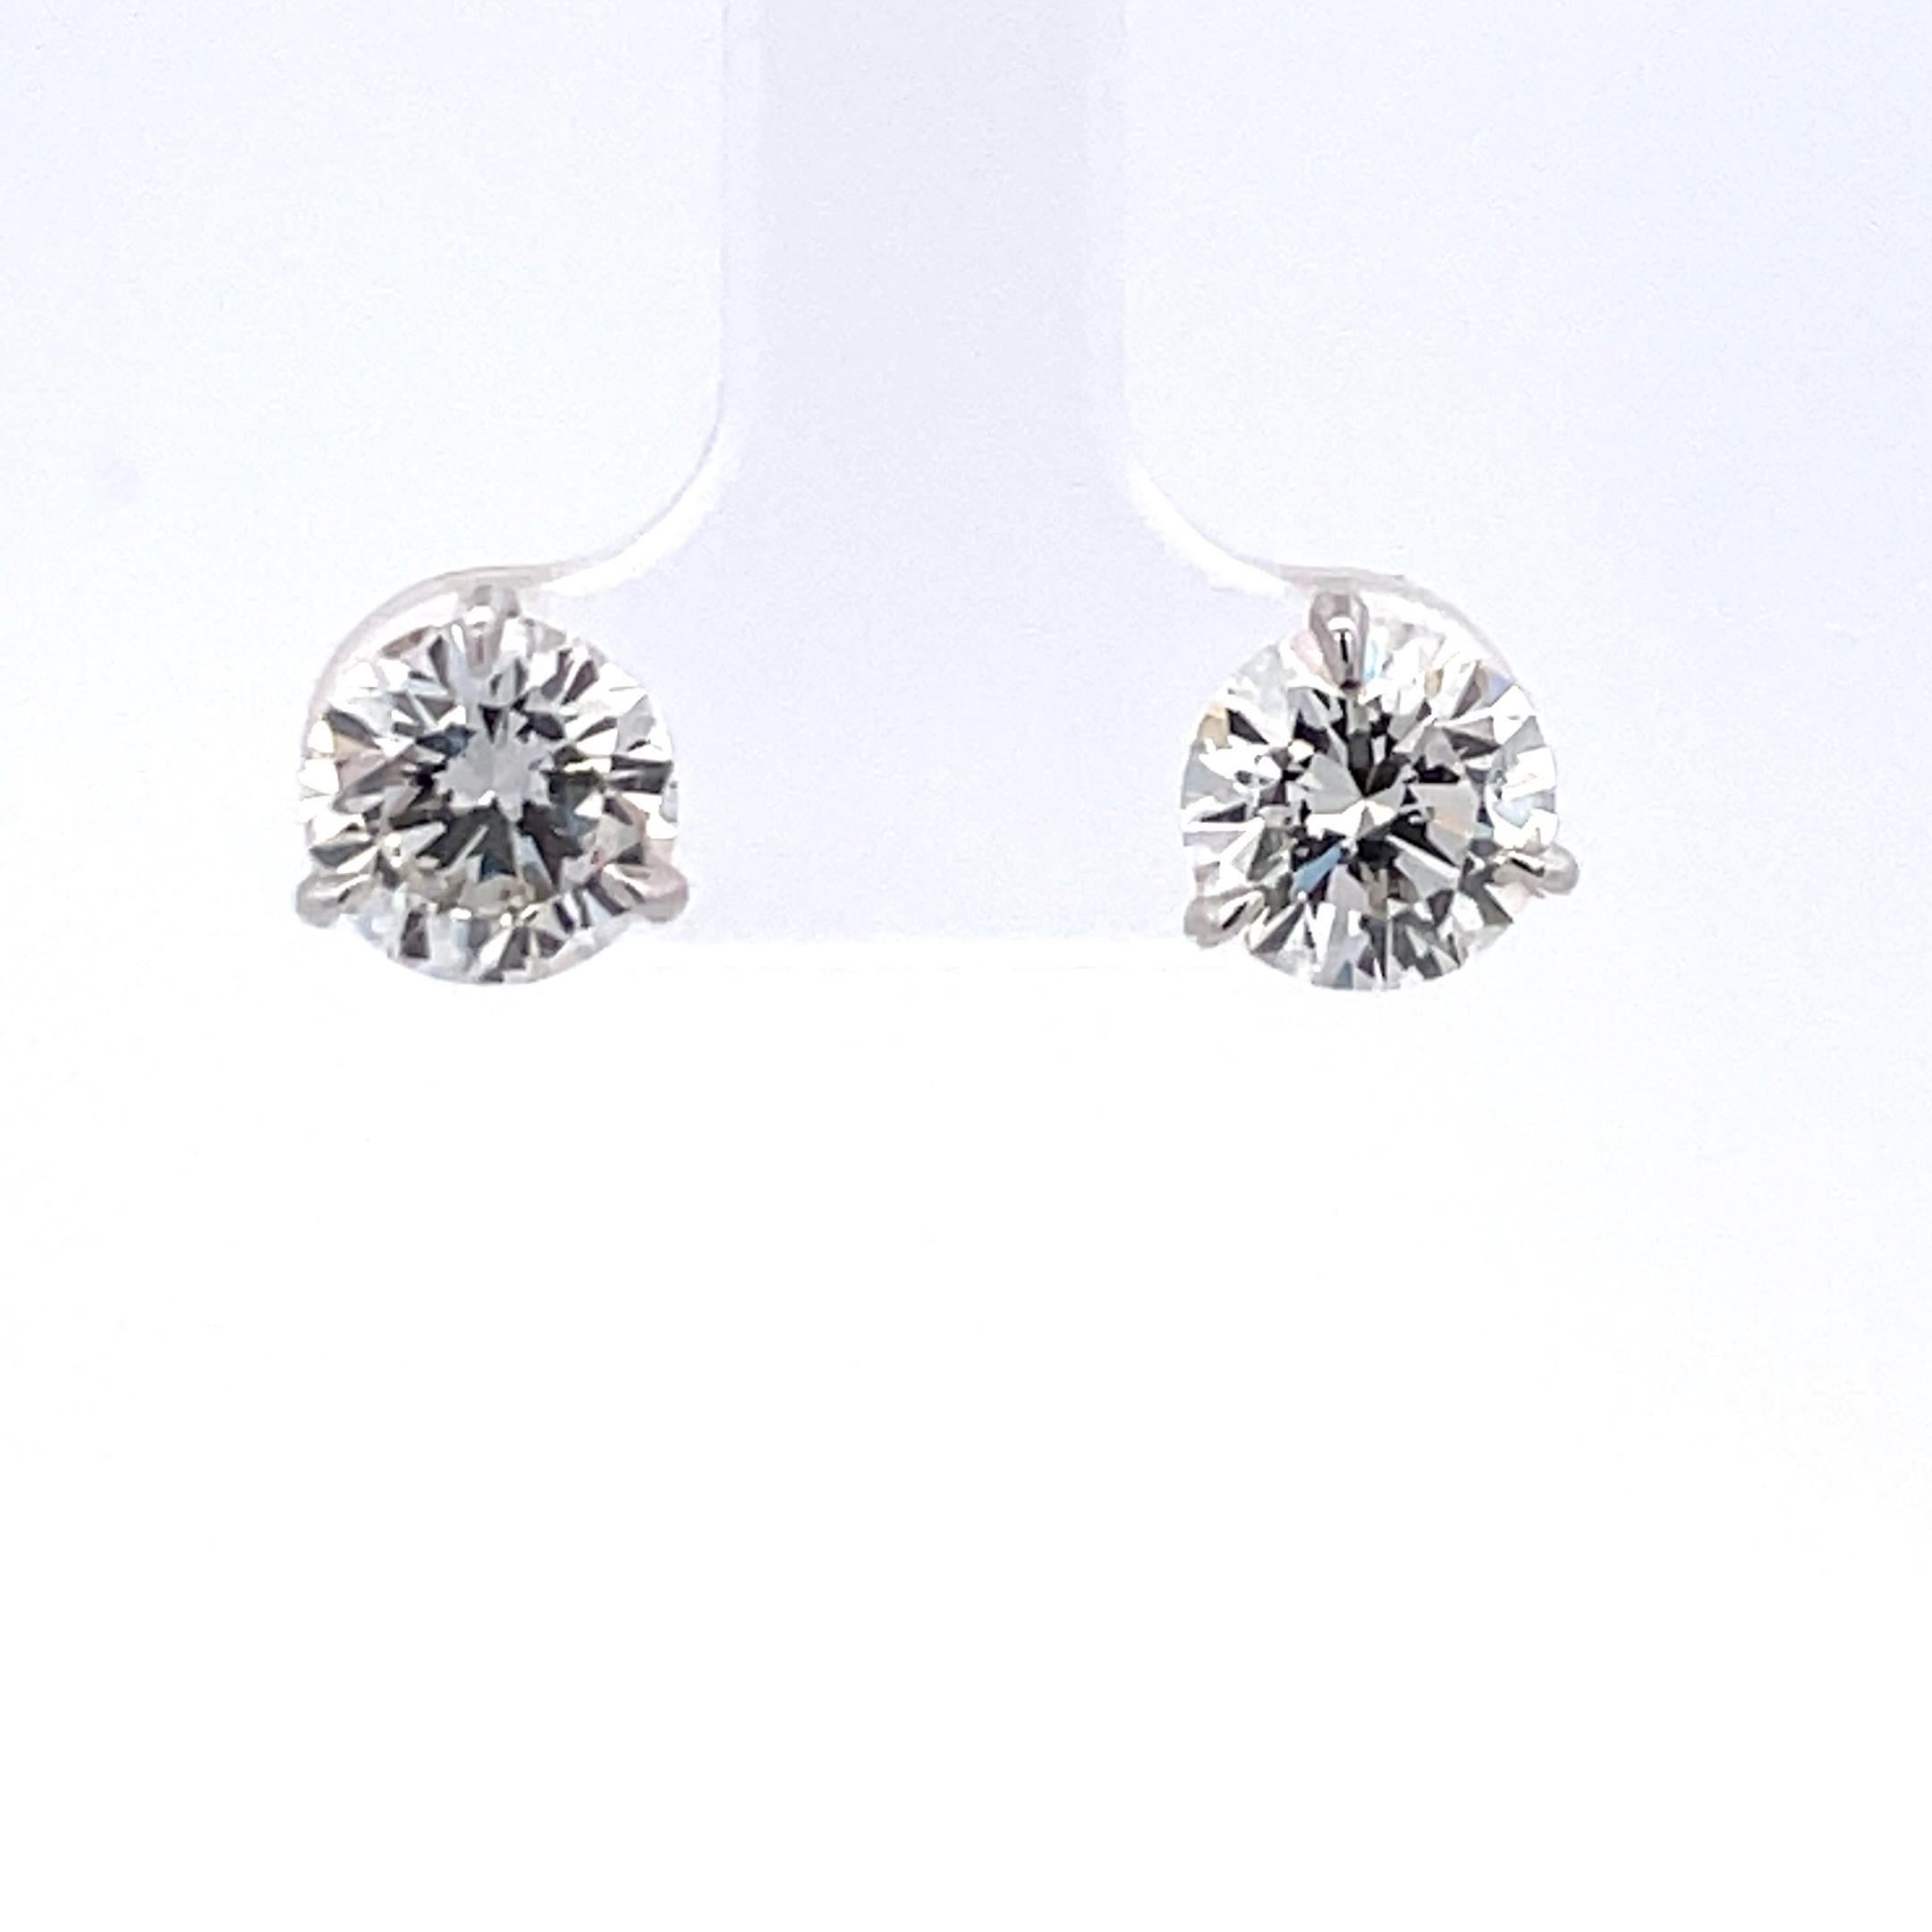 Round Cut GIA Certified Diamond Stud Earrings 3.04 Carats H-I I1 18 Karat White Gold For Sale